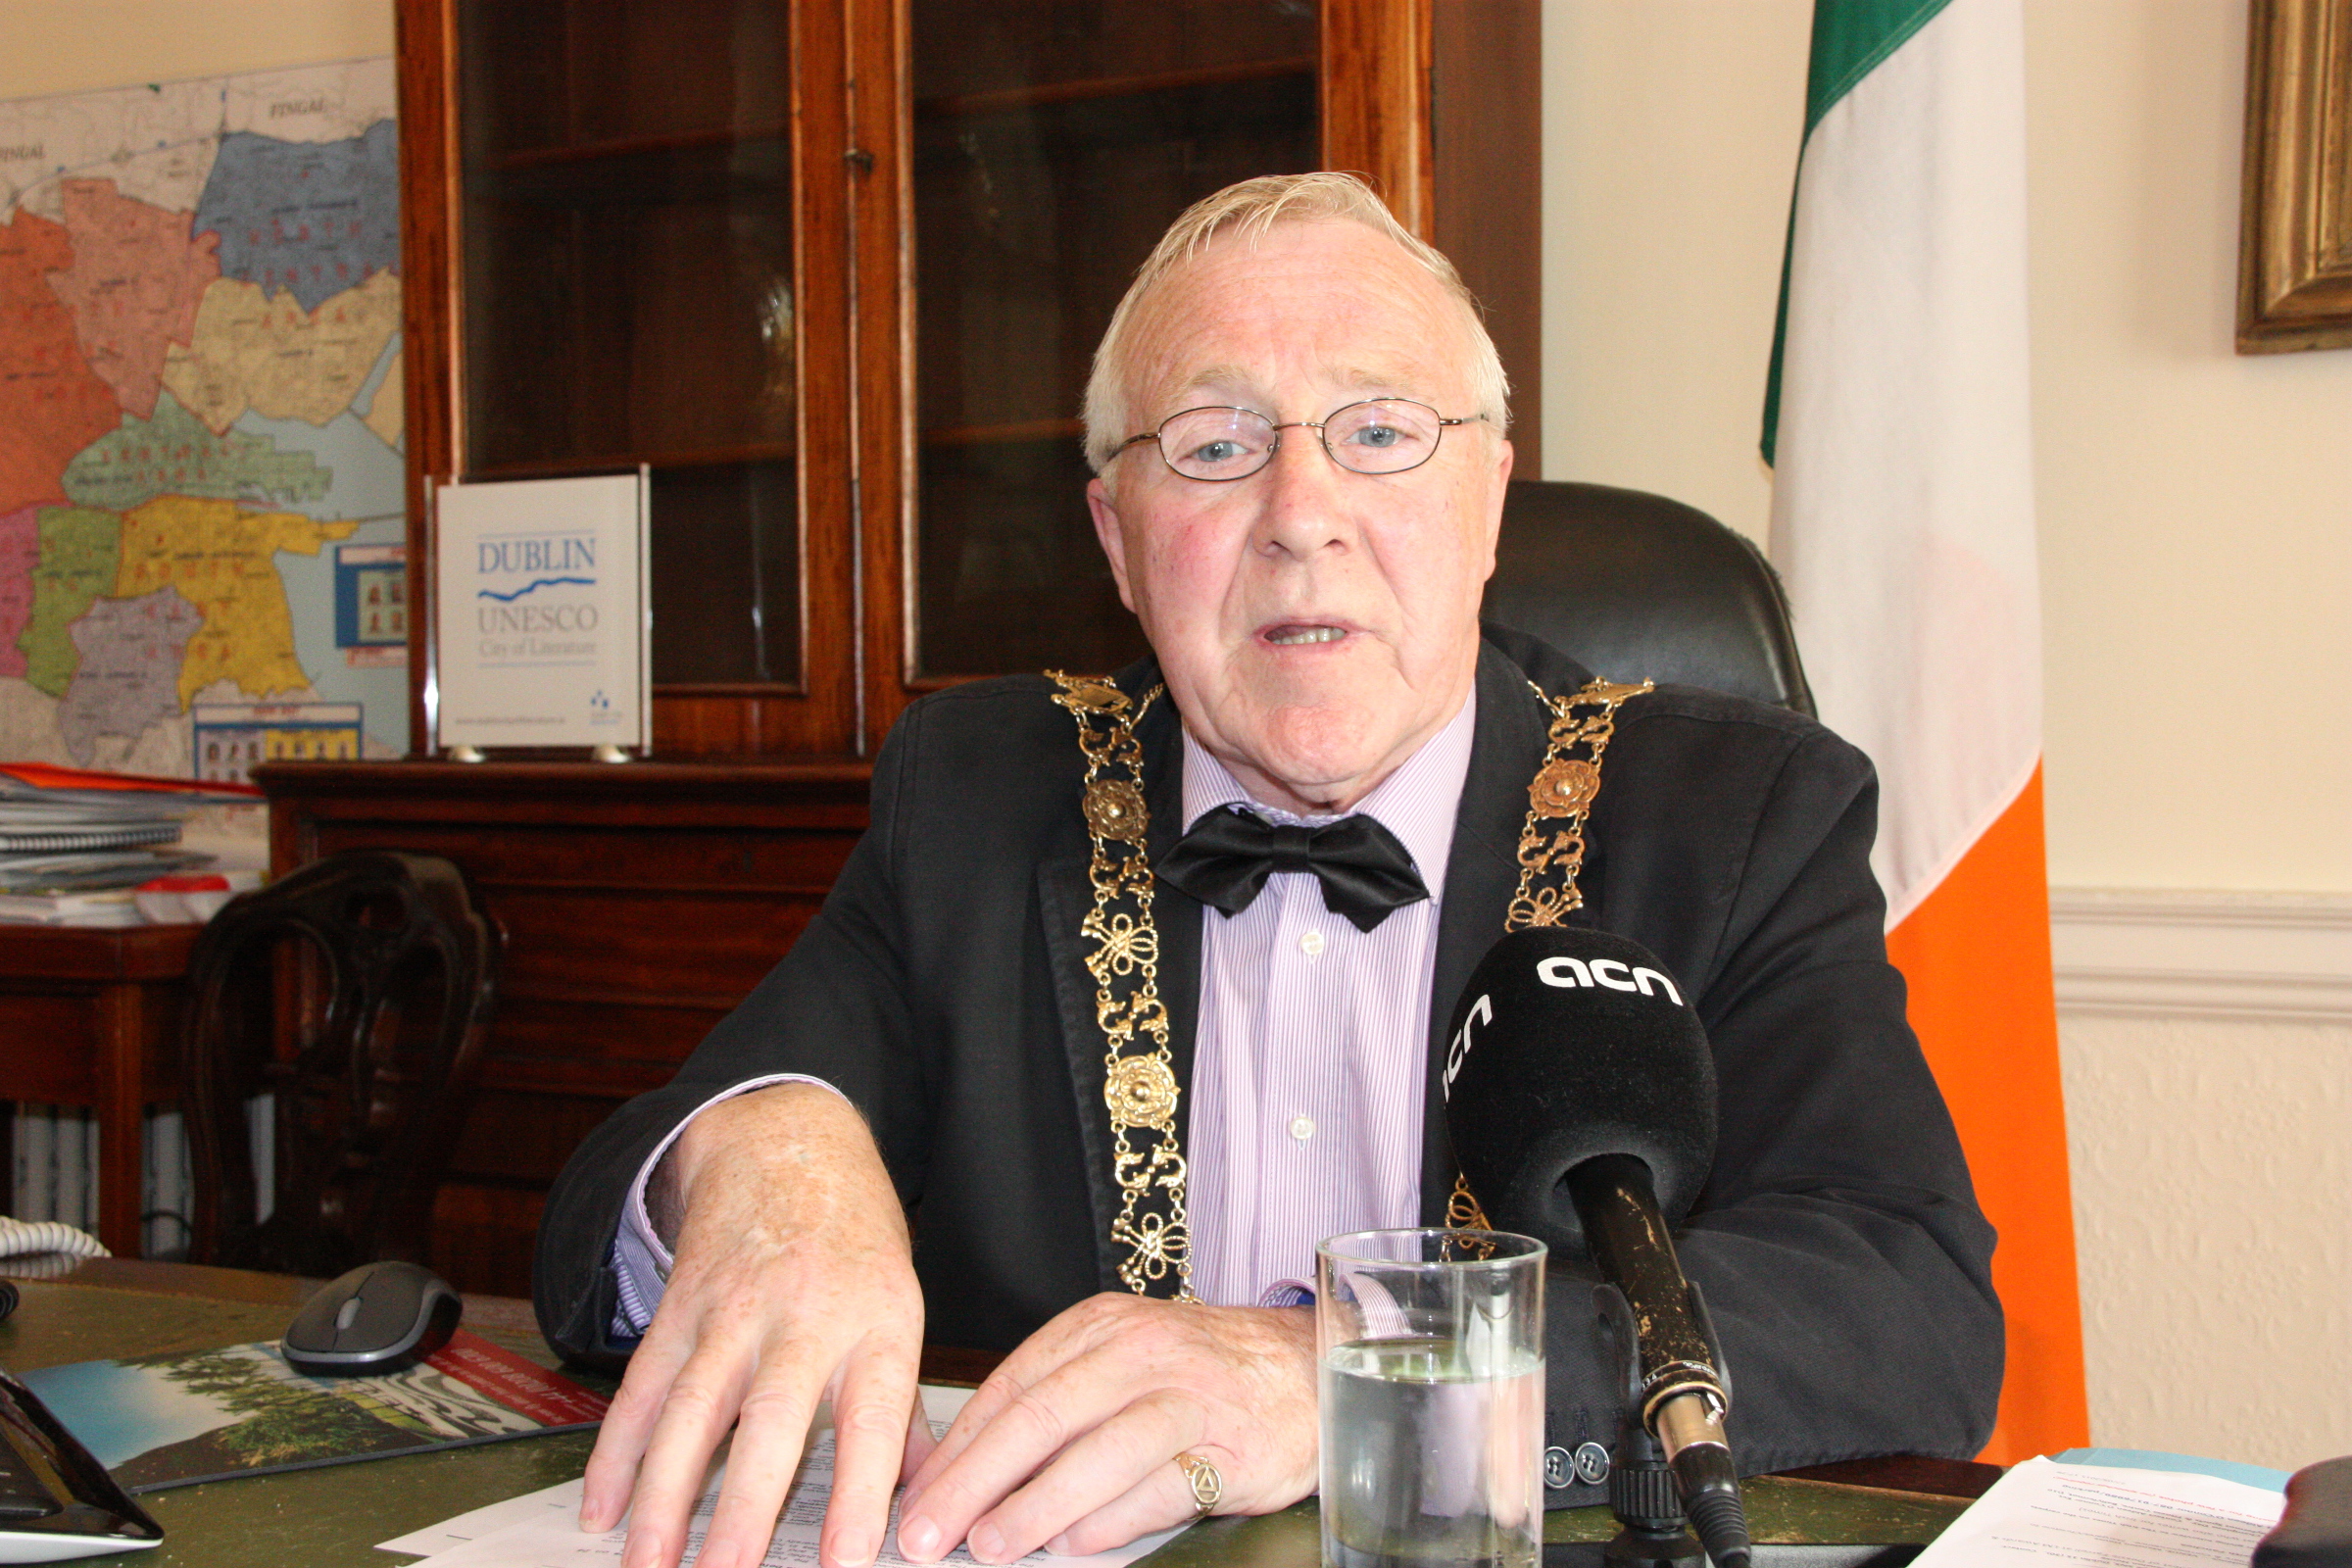 The Lord Mayor of Dublin, Christy Burke (by ACN)